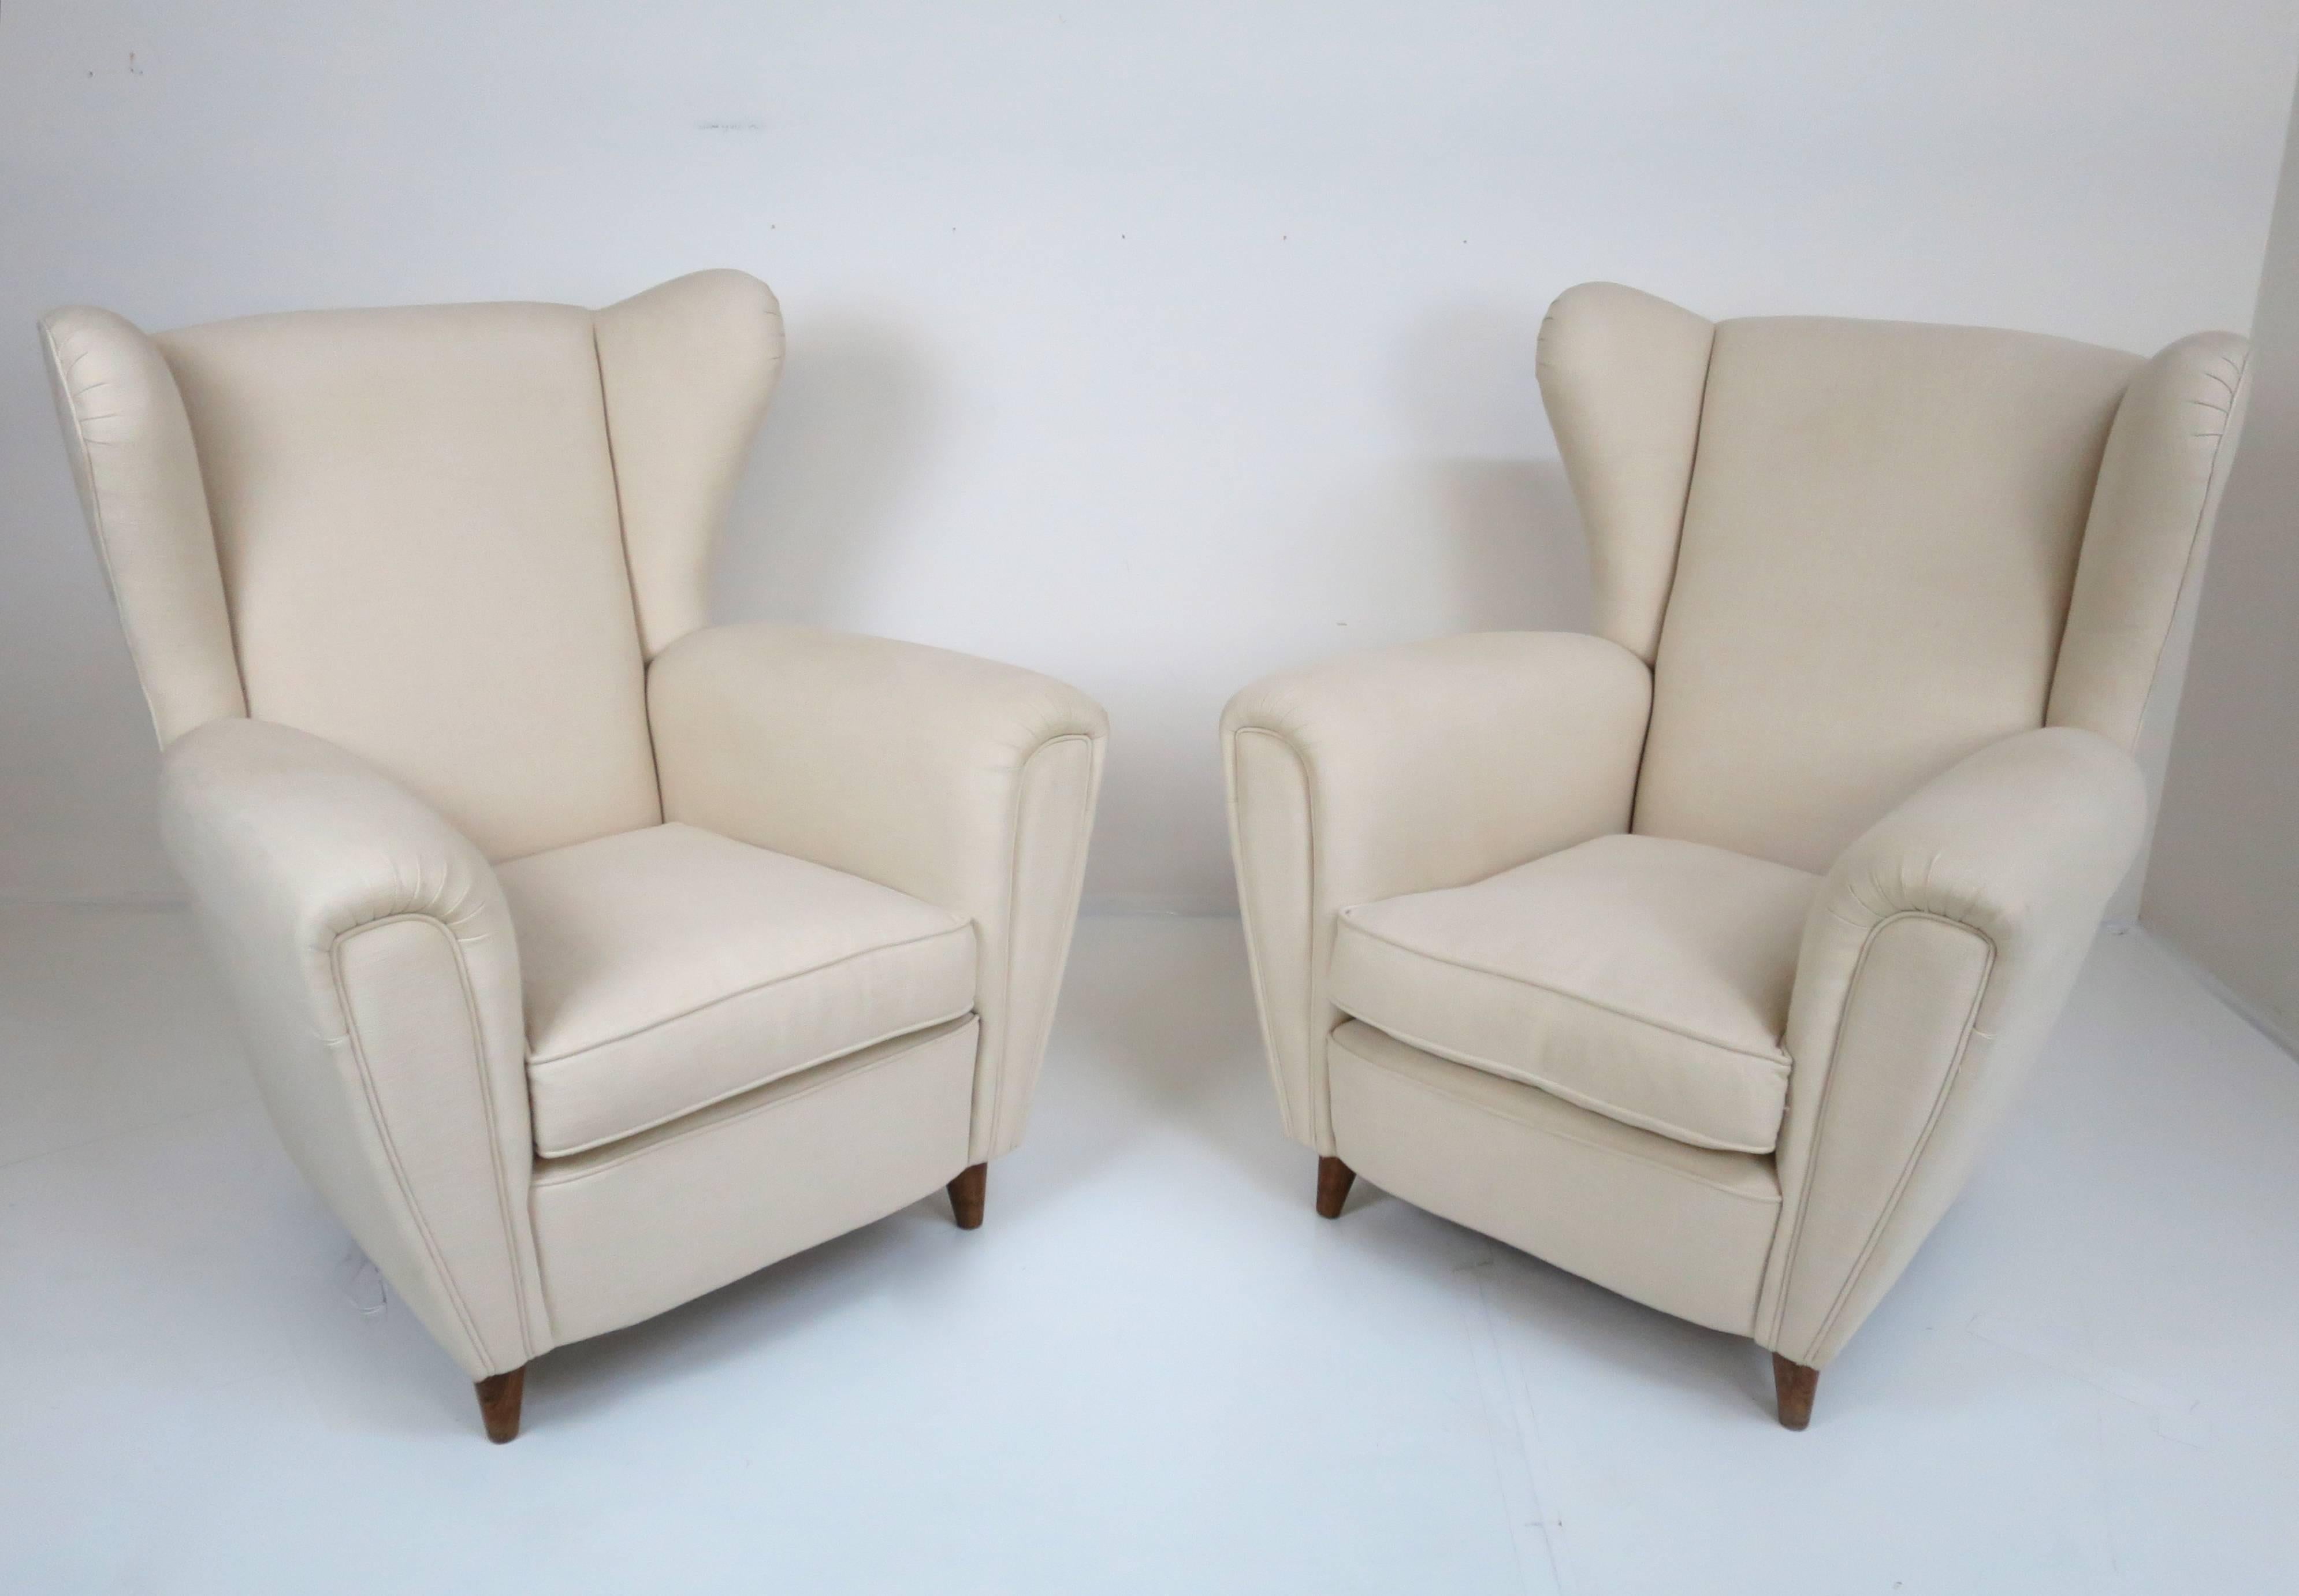 Stylized Italian wingback pair of large chairs, circa1949. Reupholstered in cream linen with original down seat cushions. This pair of Italian chairs is large-scaled and will work well with contemporary furnishings as well as vintage, which is not